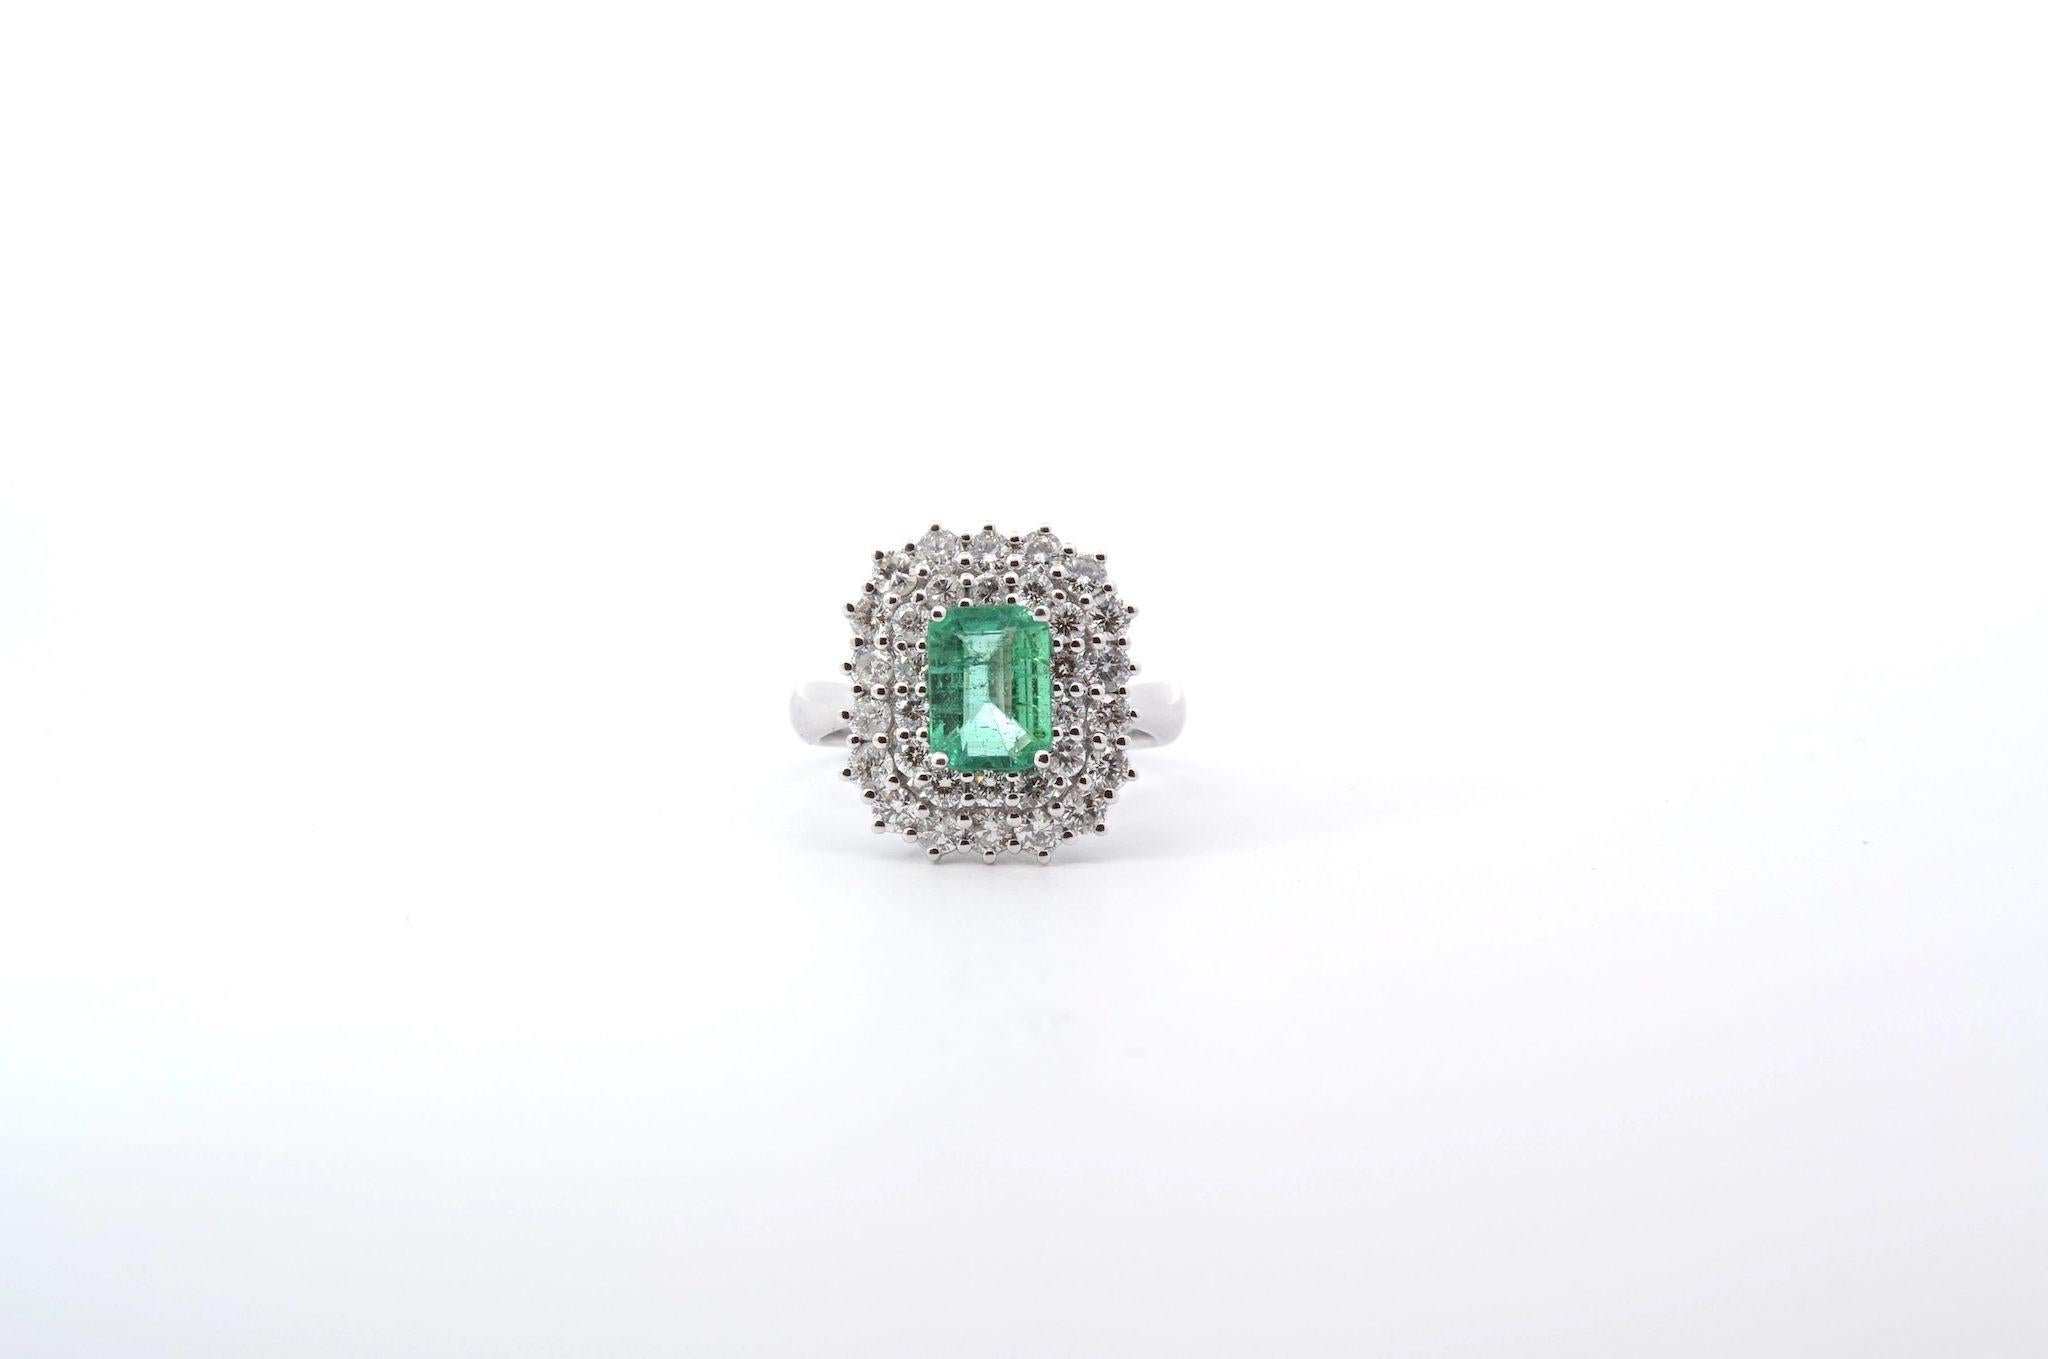 Stones: 1 emerald of 1.39cts, 32 diamonds: 1.33cts
Material: 18k white gold
Dimensions: 1.6cm x 1.4cm
Weight: 6.2g
Period: 1970
Size: 52 (free sizing)
Certificate
Ref. :